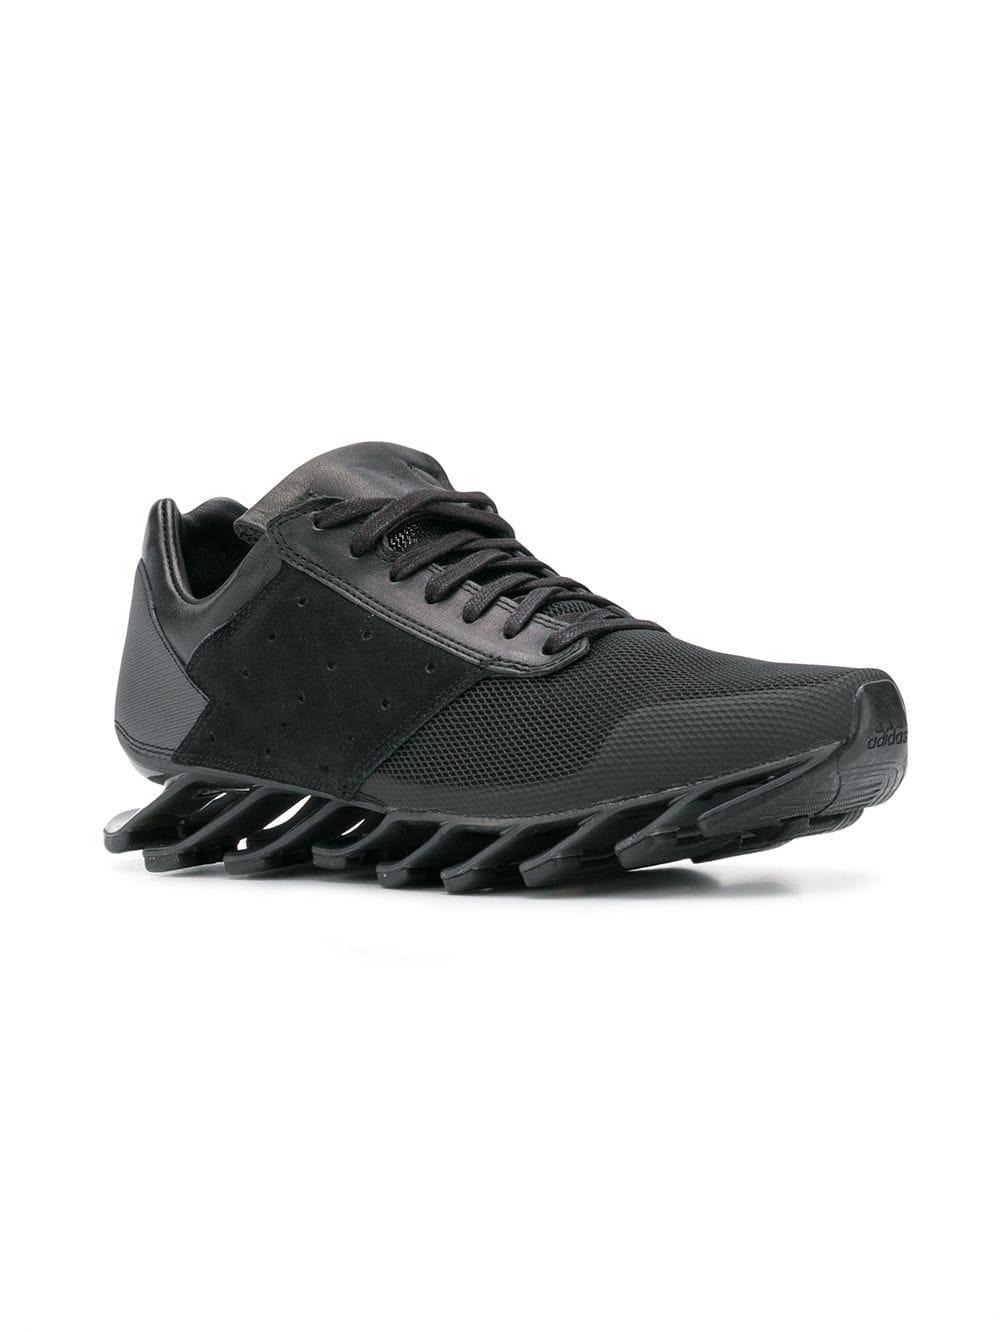 Rick Owens Leather Adidas Springblade Sneakers in Black for Men - Lyst